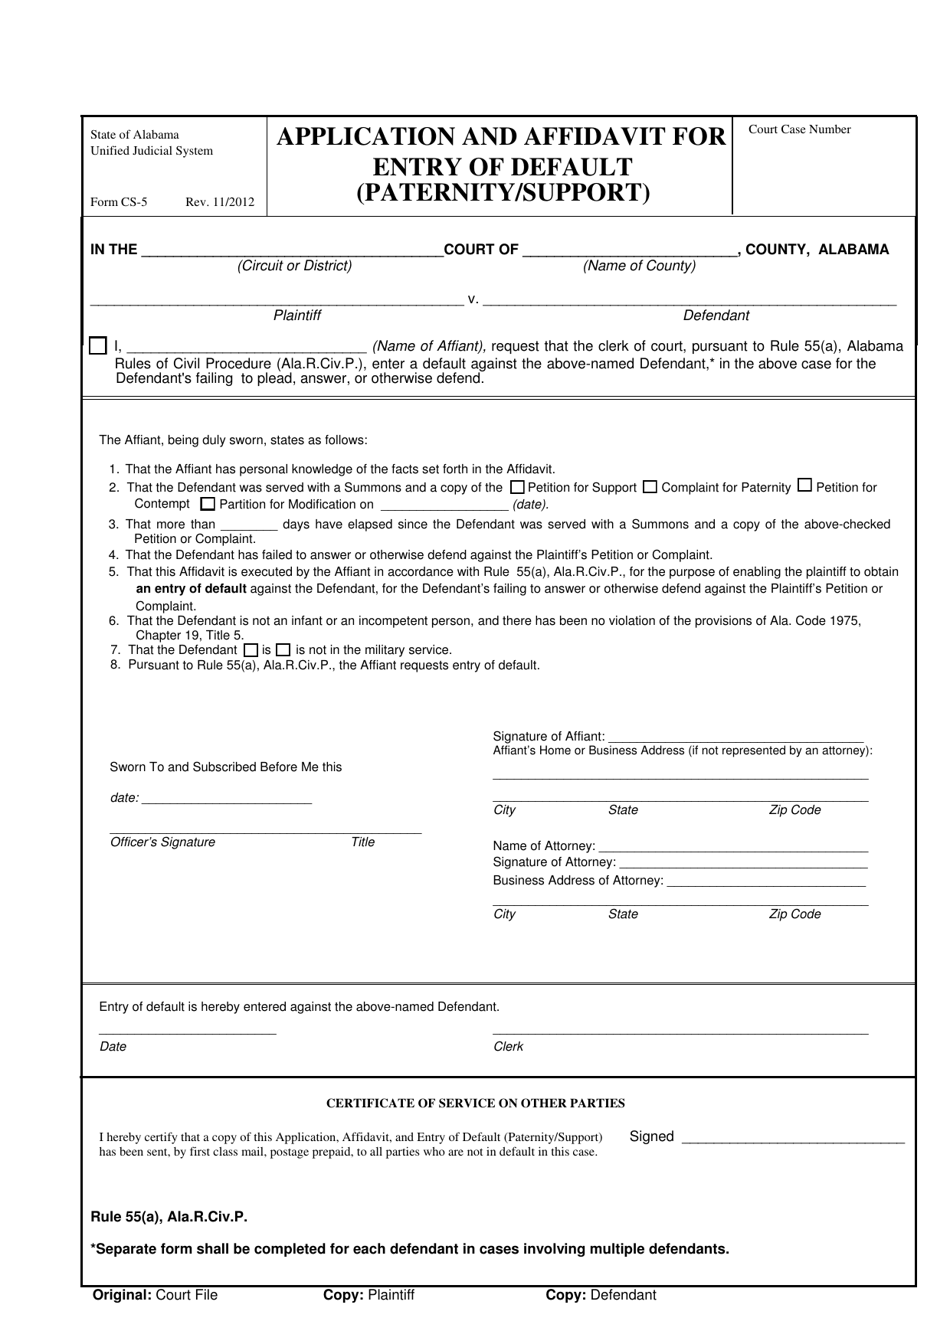 Form CS-05 Application and Affidavit for Entry of Default (Paternity / Support) - Alabama, Page 1